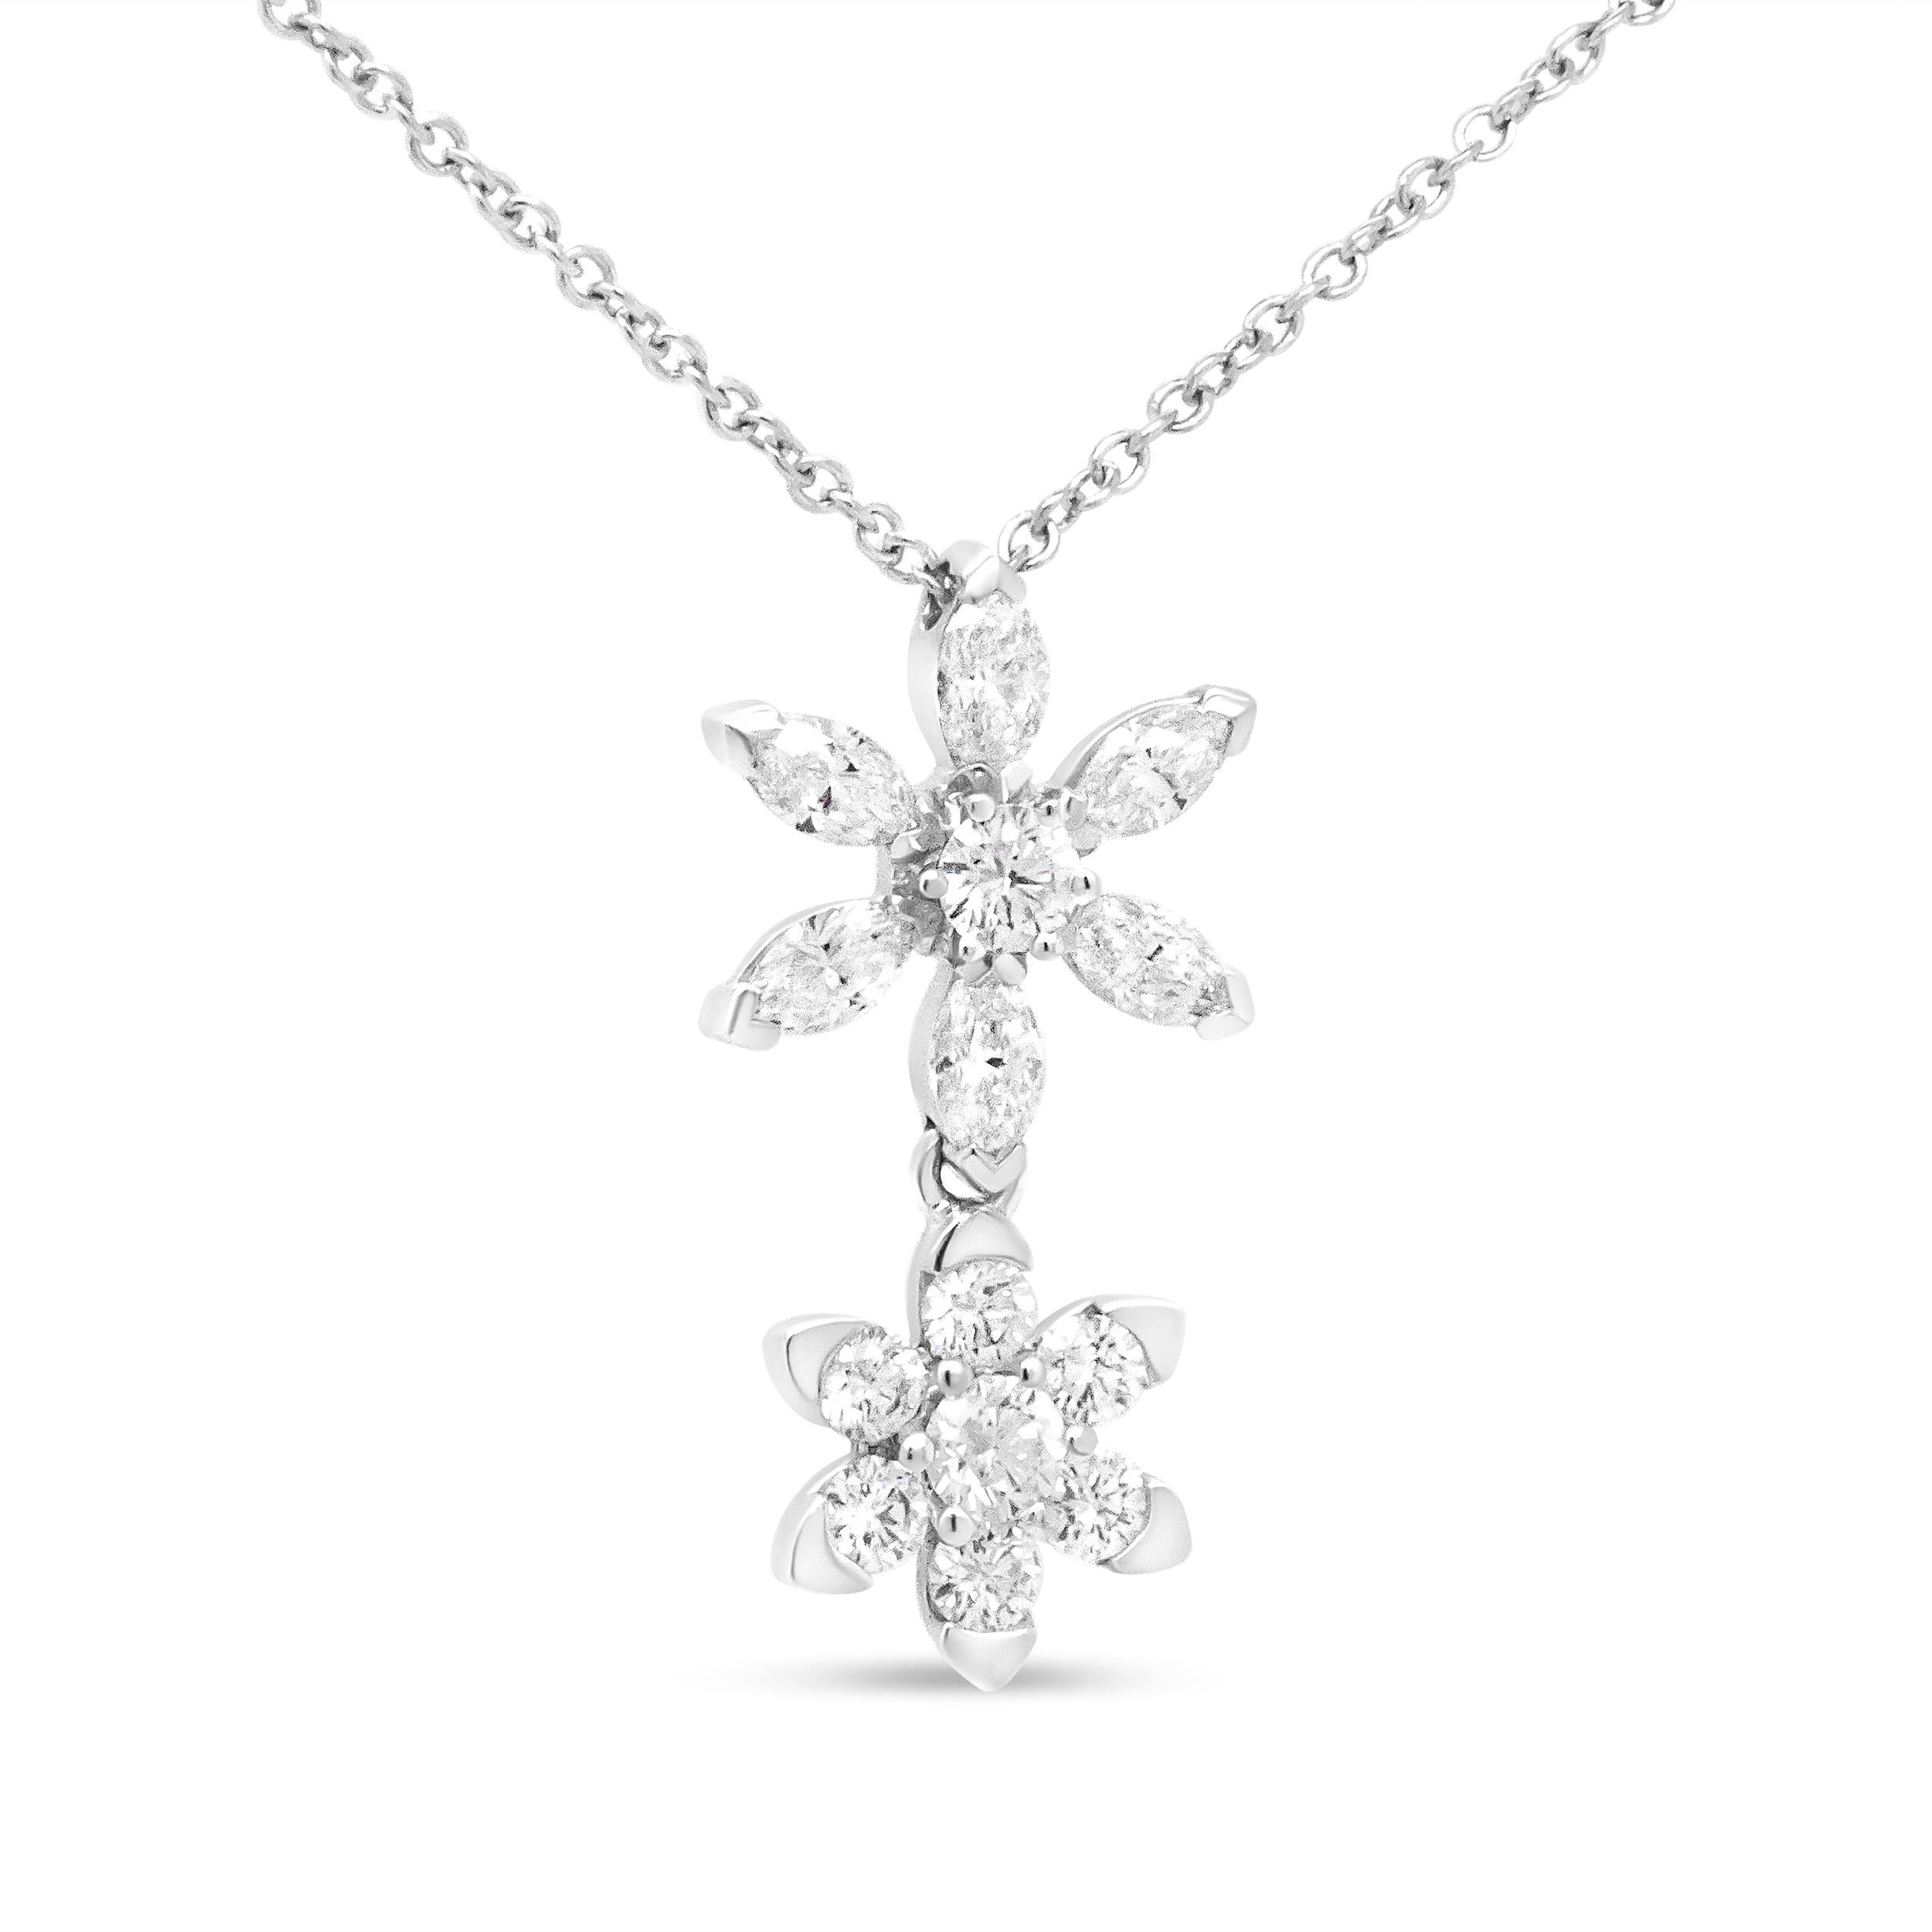 Perfect for year around wear, this stunning 18k white gold pendant necklace is inspired by the beauty of nature. Two unique floral blossoms extend from an 18